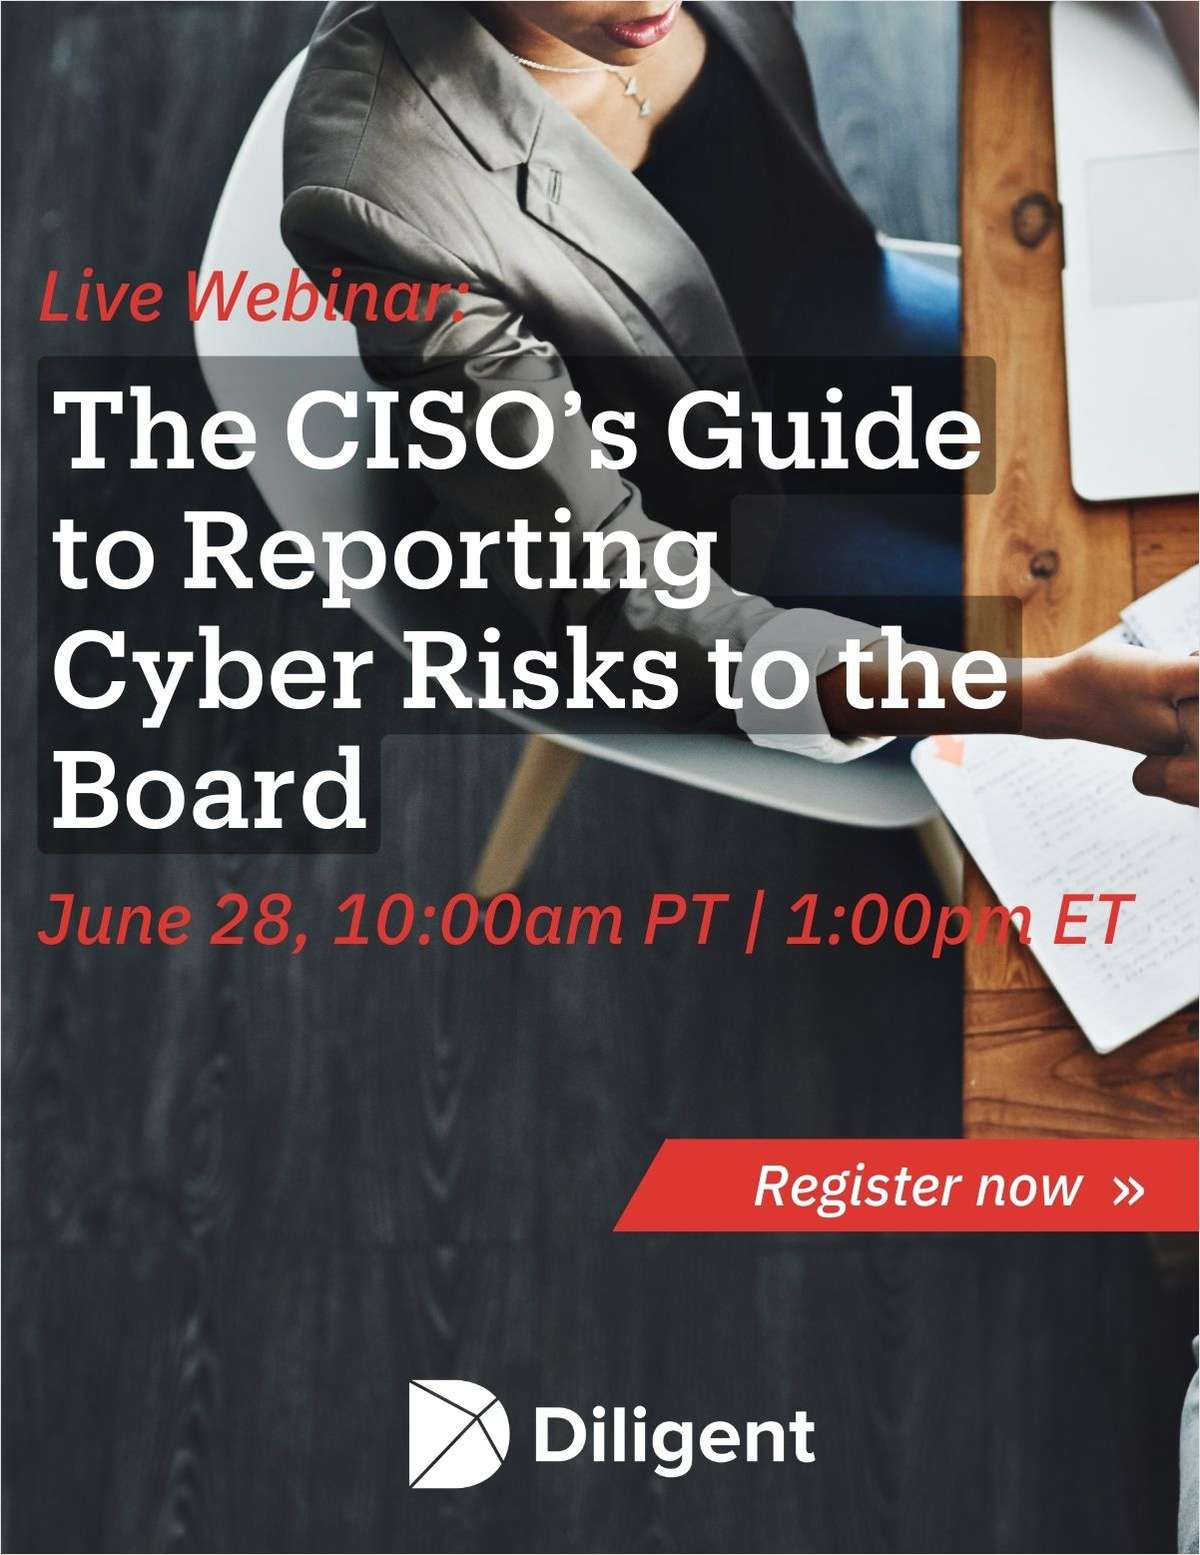 The CISO's Guide to Reporting Cyber Risks to the Board